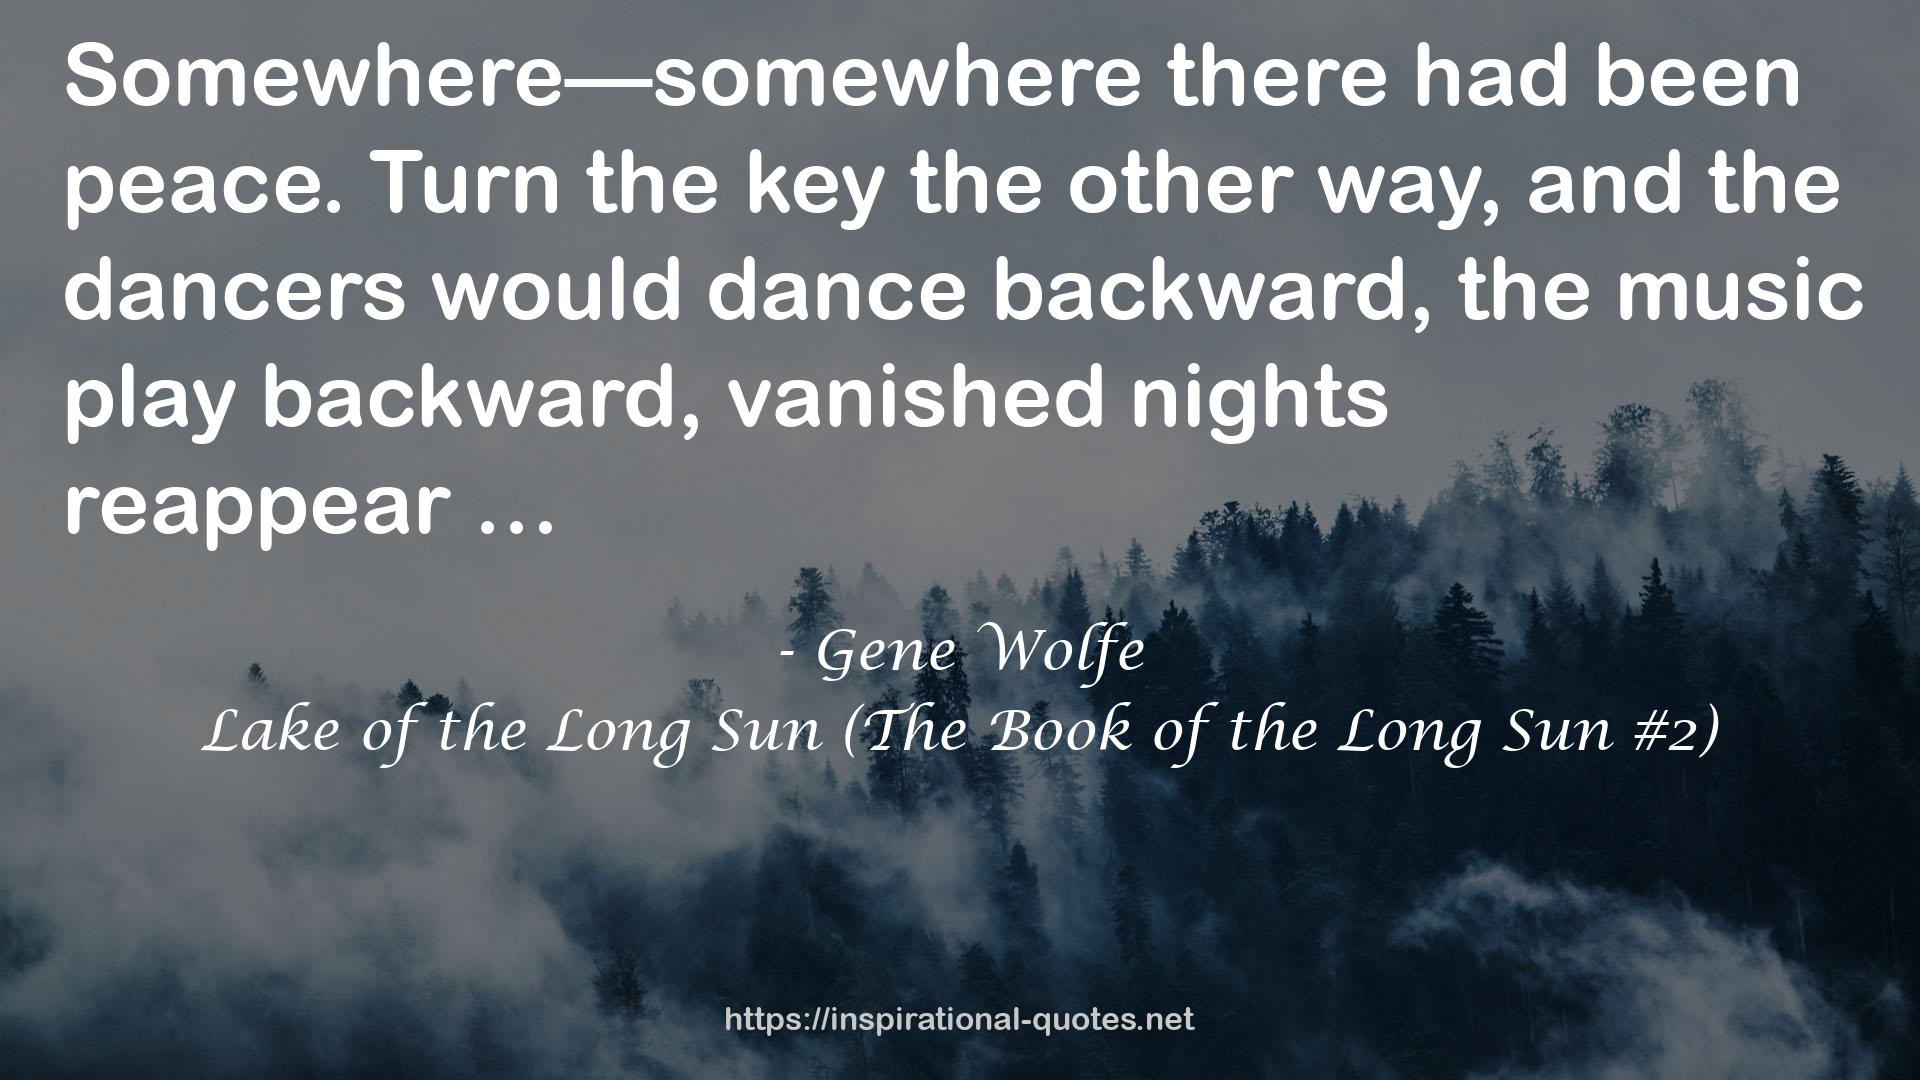 Lake of the Long Sun (The Book of the Long Sun #2) QUOTES